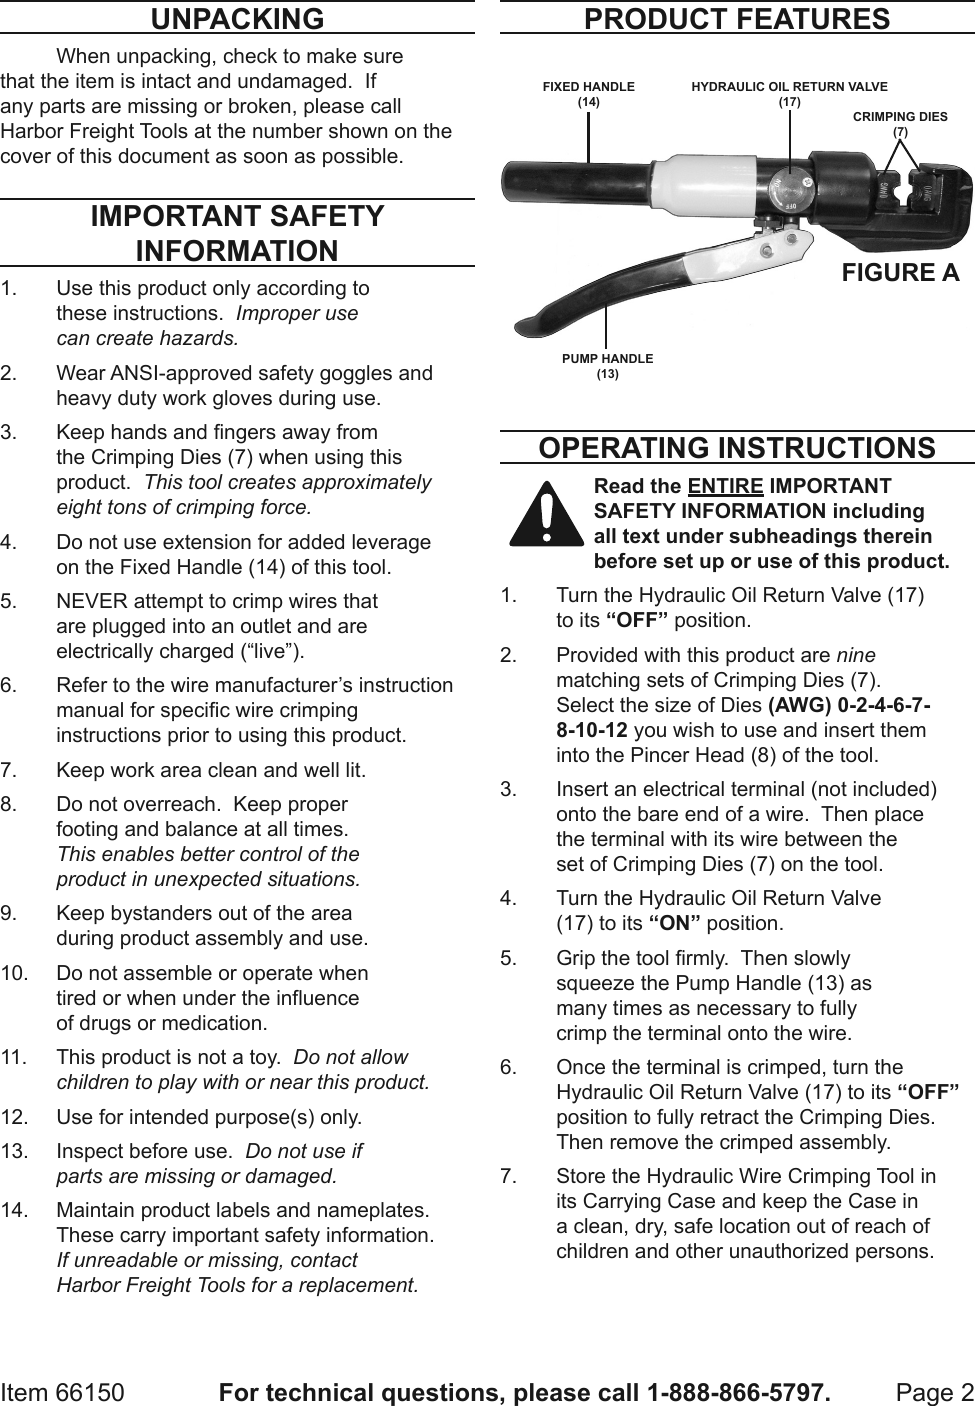 Page 2 of 4 - Harbor-Freight Harbor-Freight-Hydraulic-Wire-Crimping-Tool-Product-Manual-  Harbor-freight-hydraulic-wire-crimping-tool-product-manual